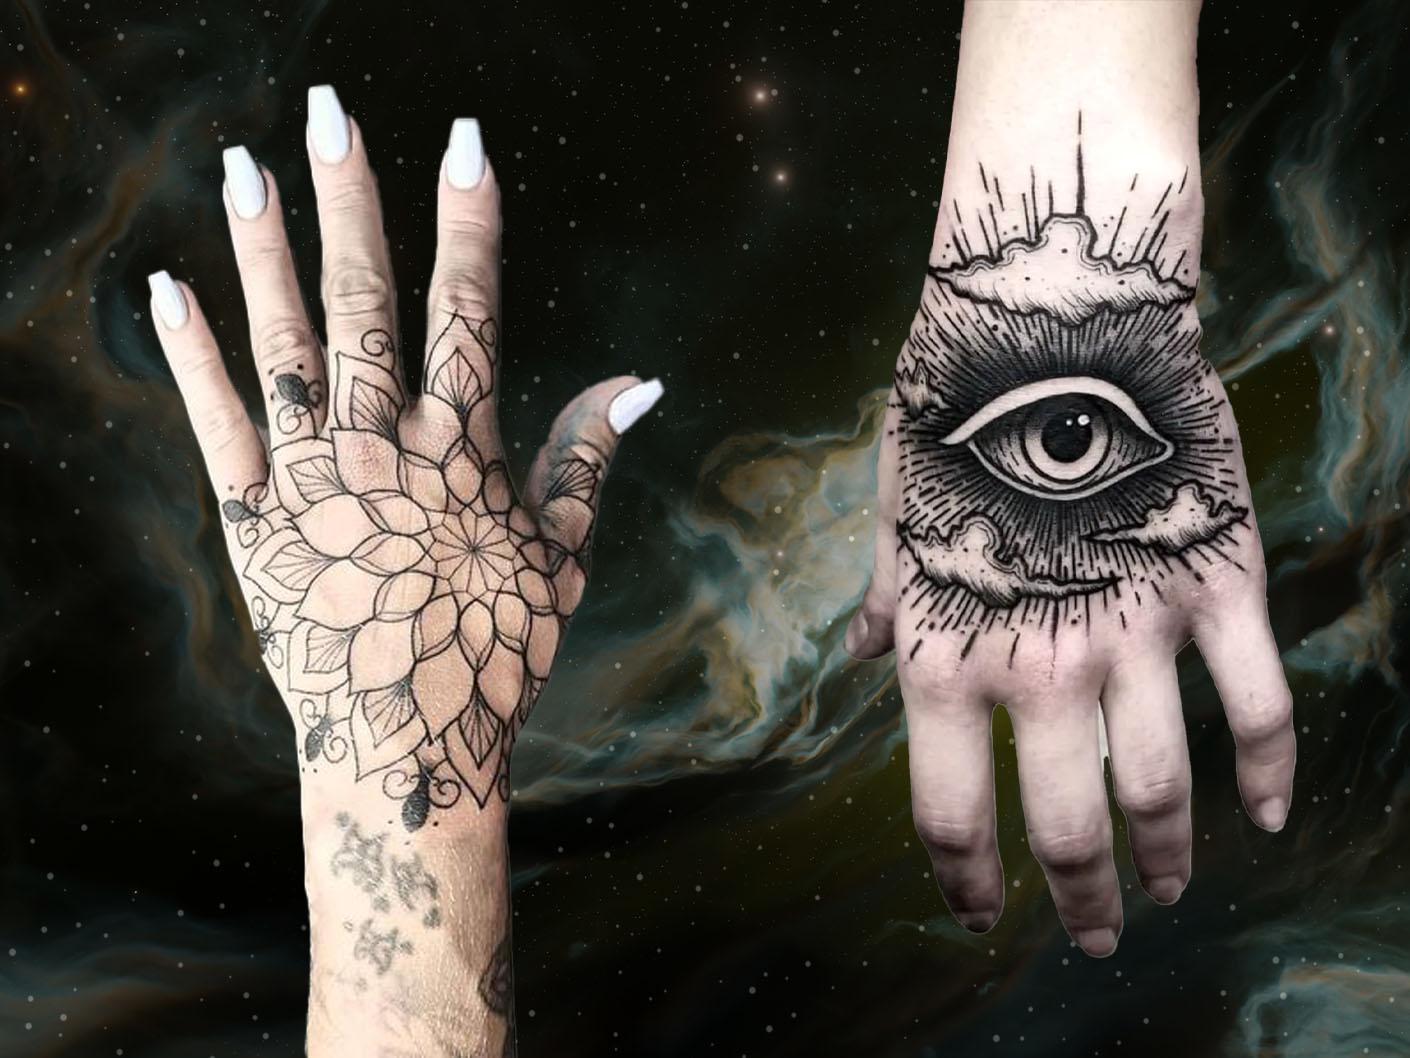 Palm Tattoos: Tips, Common Concerns, and Design Ideas | Tattooing 101